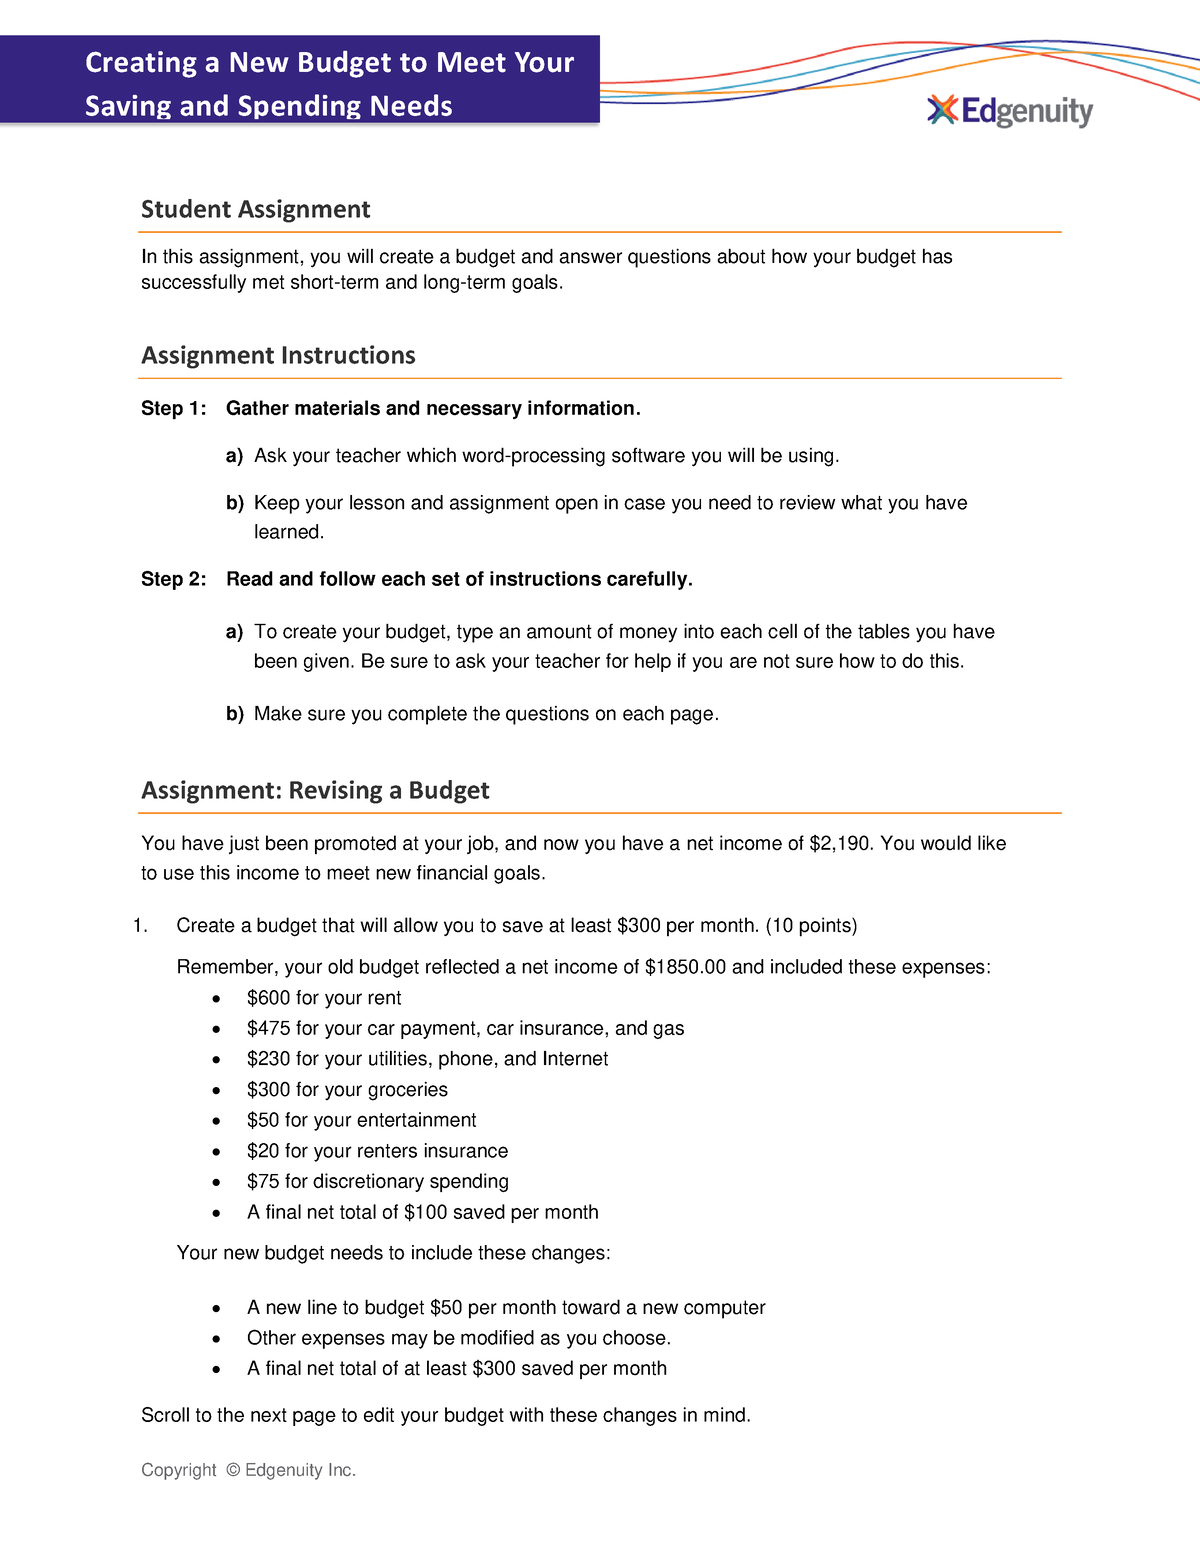 creating a new budget student assignment edgenuity answers